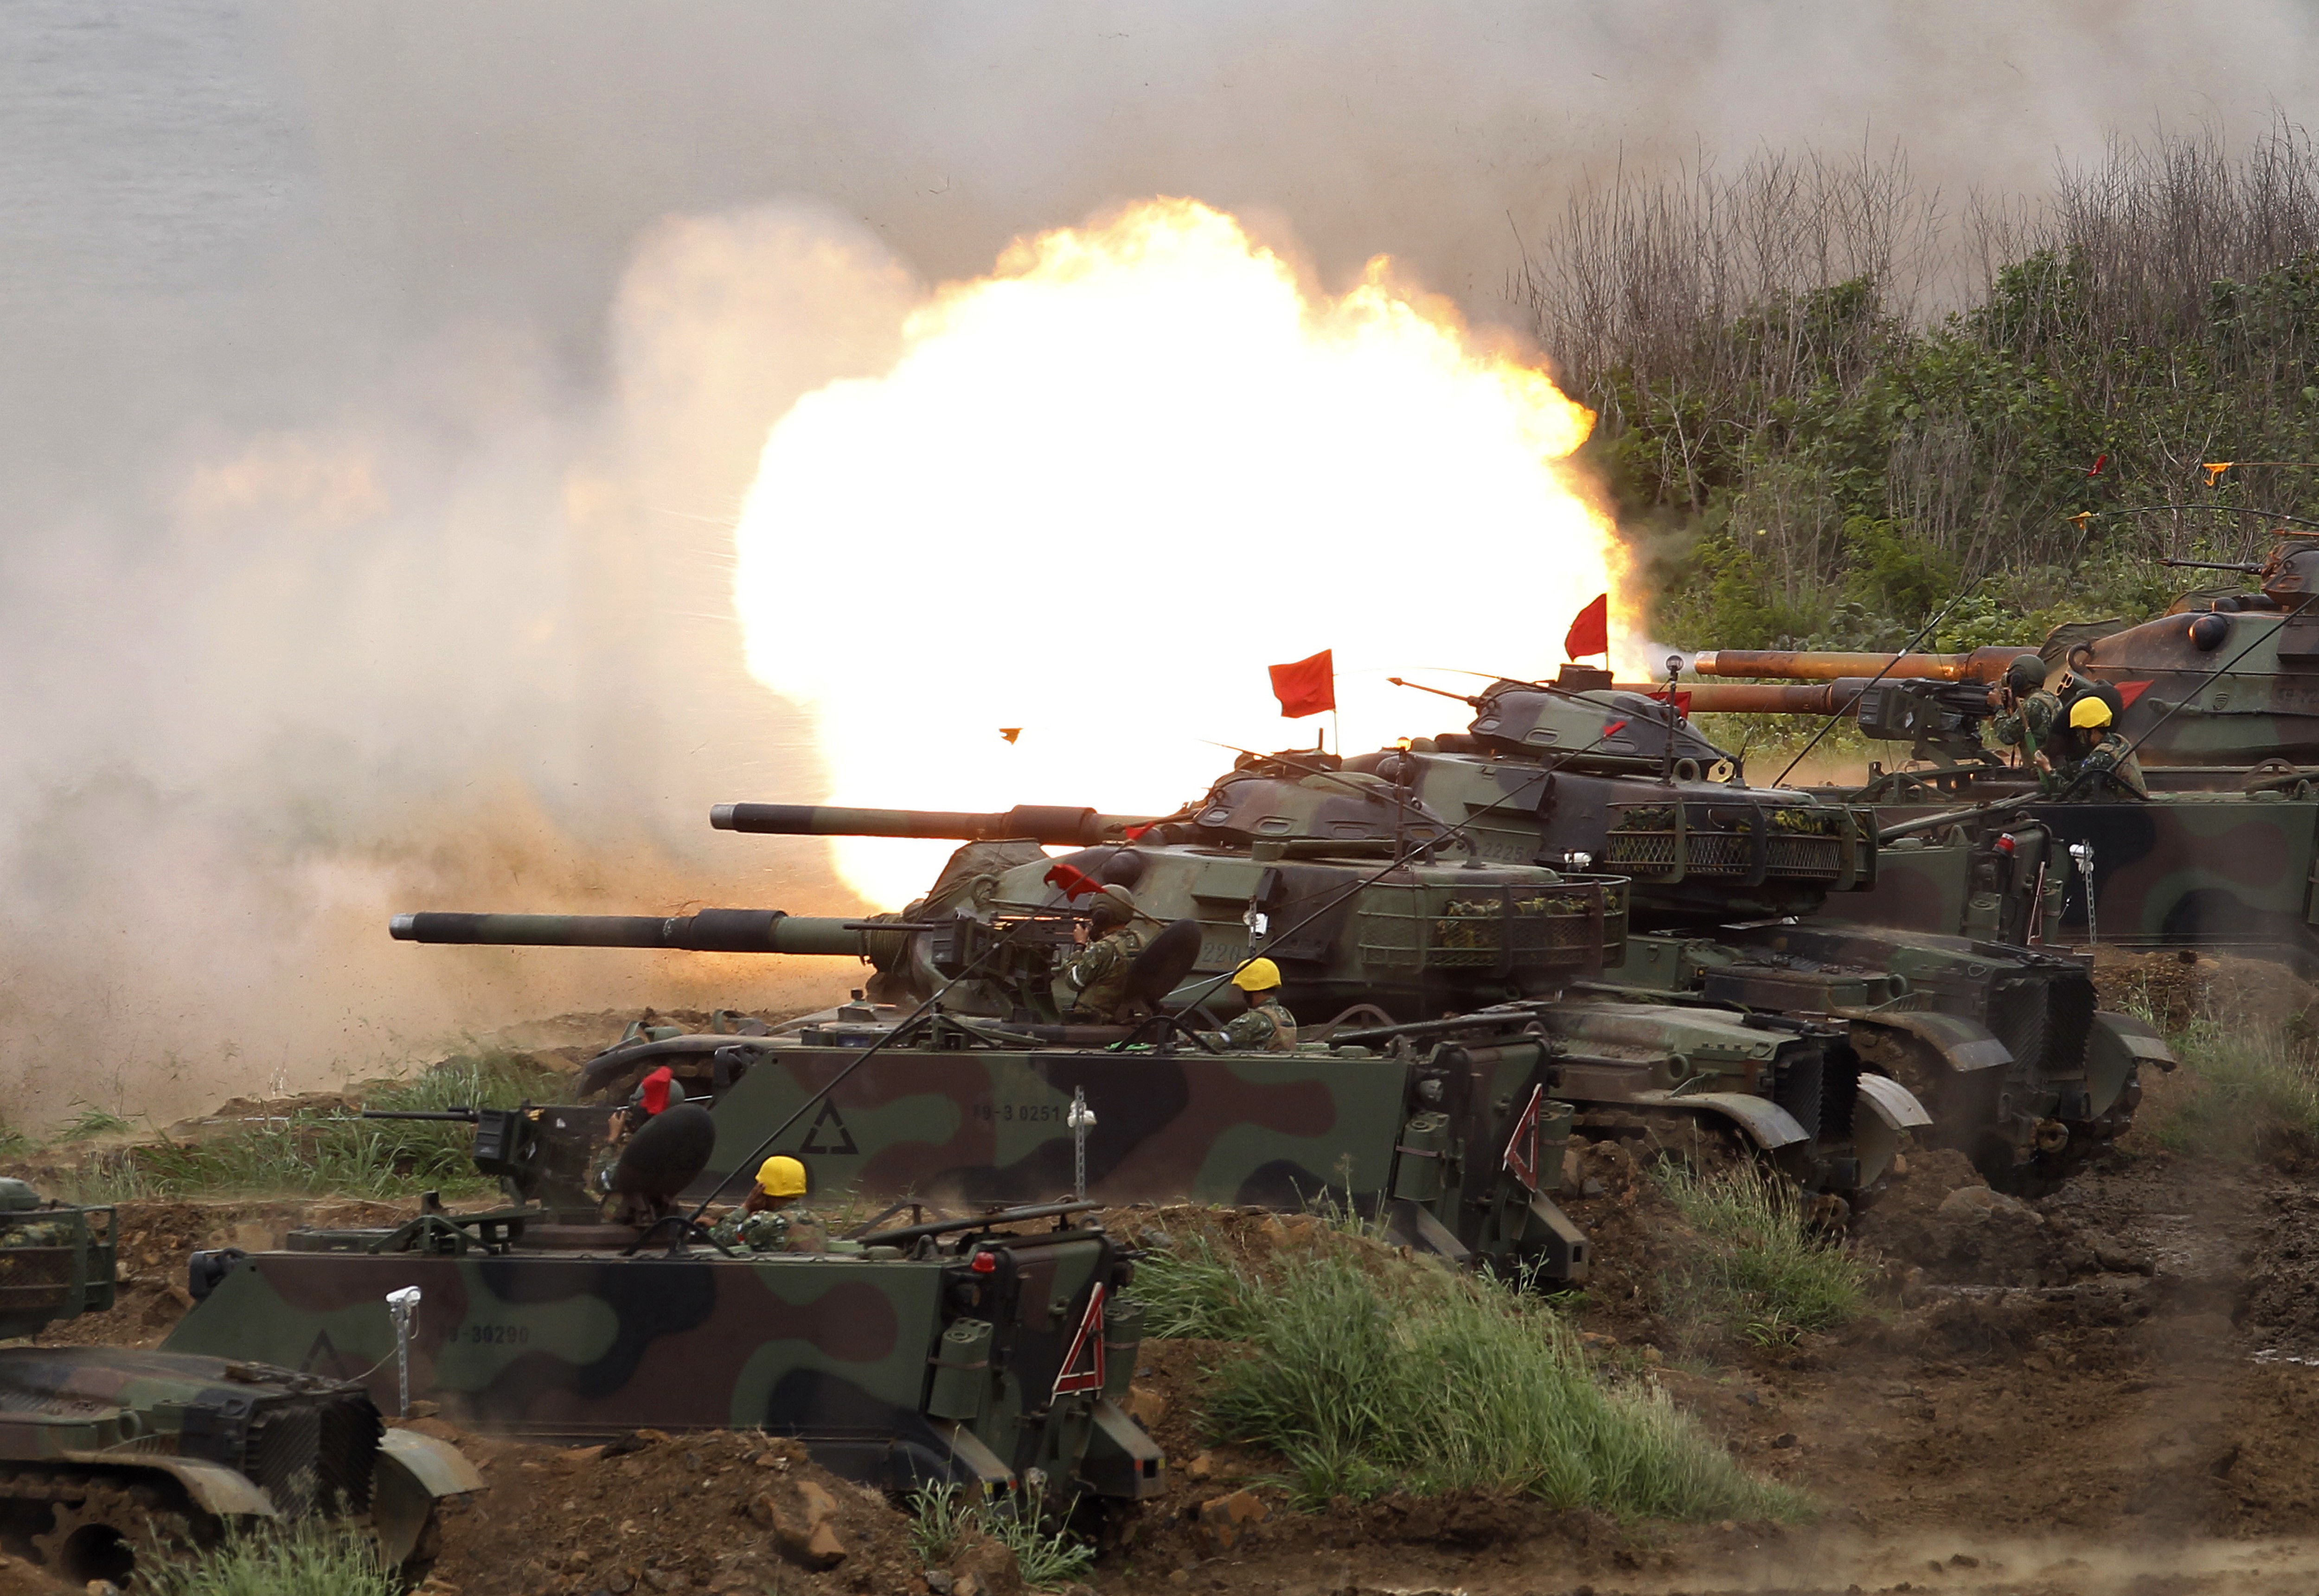 A line of US Patton tanks fire at targets during the annual Han Kuang exercises on Taiwan’s outlying Penghu Island in May. US presidents dating back to Jimmy Carter in 1979 have sold arms to Taiwan despite Beijing’s objections but would Donald Trump risk his friendship with Xi Jinping by doing so? Photo: AP